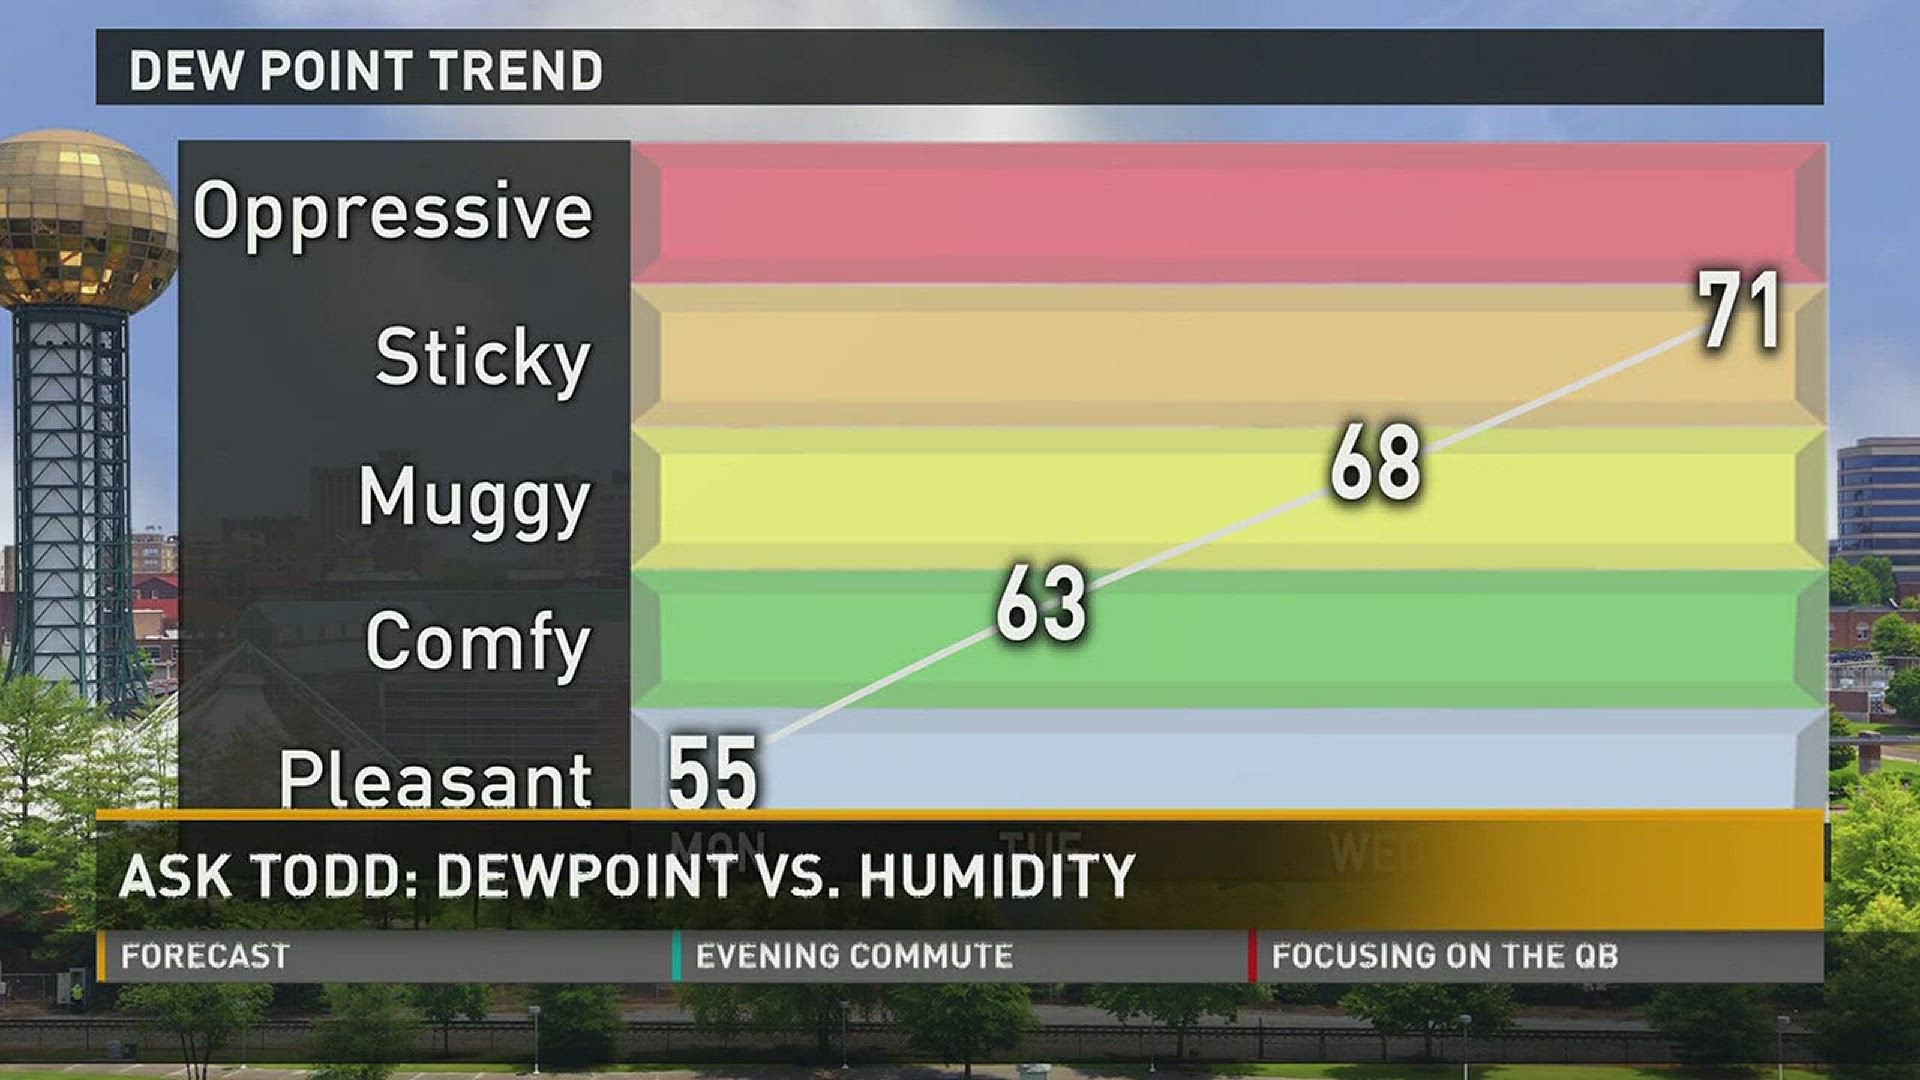 Dew point: describes the amount of moisture in the airHumidity: moisture in the air *PLUS* temperature.